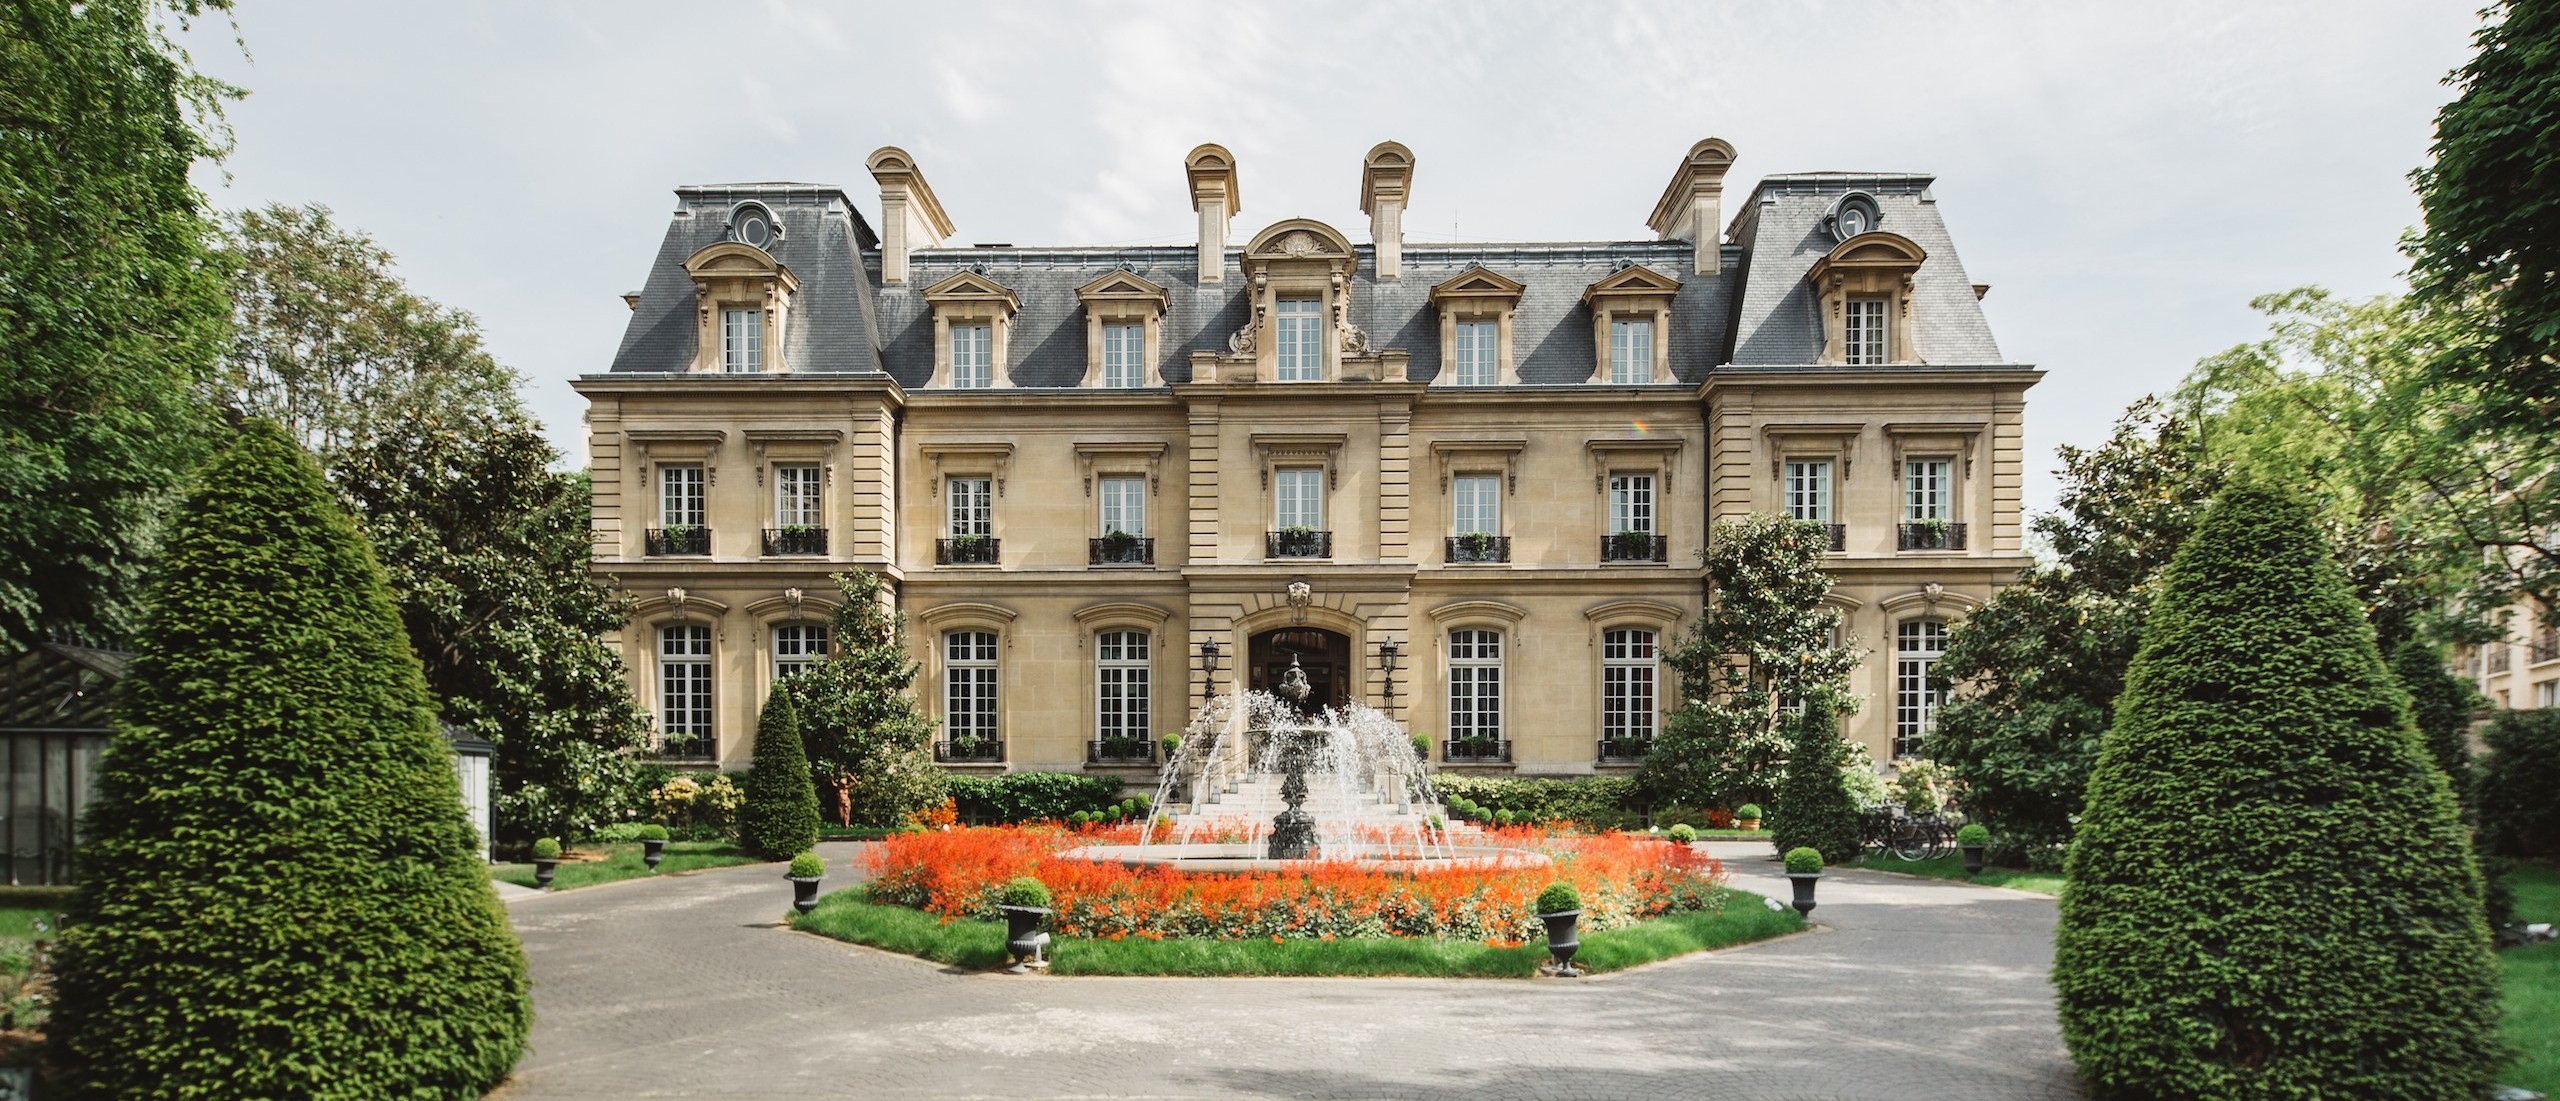 news-main-relais-chateaux-heralds-new-era-with-launch-of-1m-digital-media-campaign.1545243785.jpg